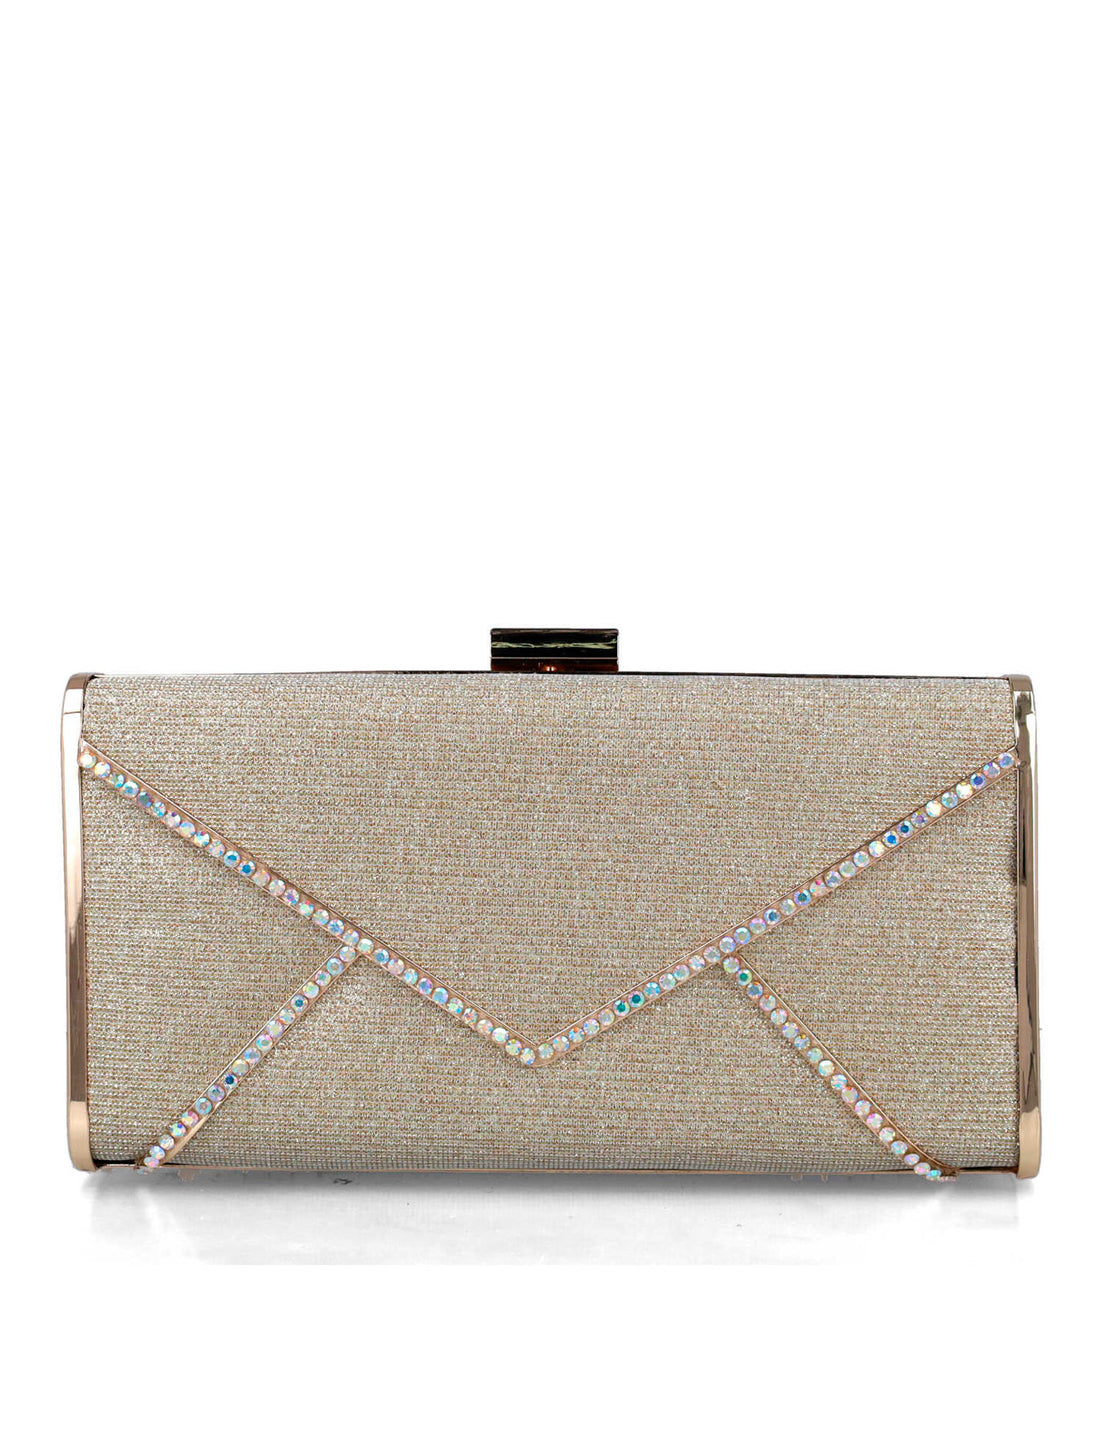 Beige Clutch With Gold Hardware_85656_00_01